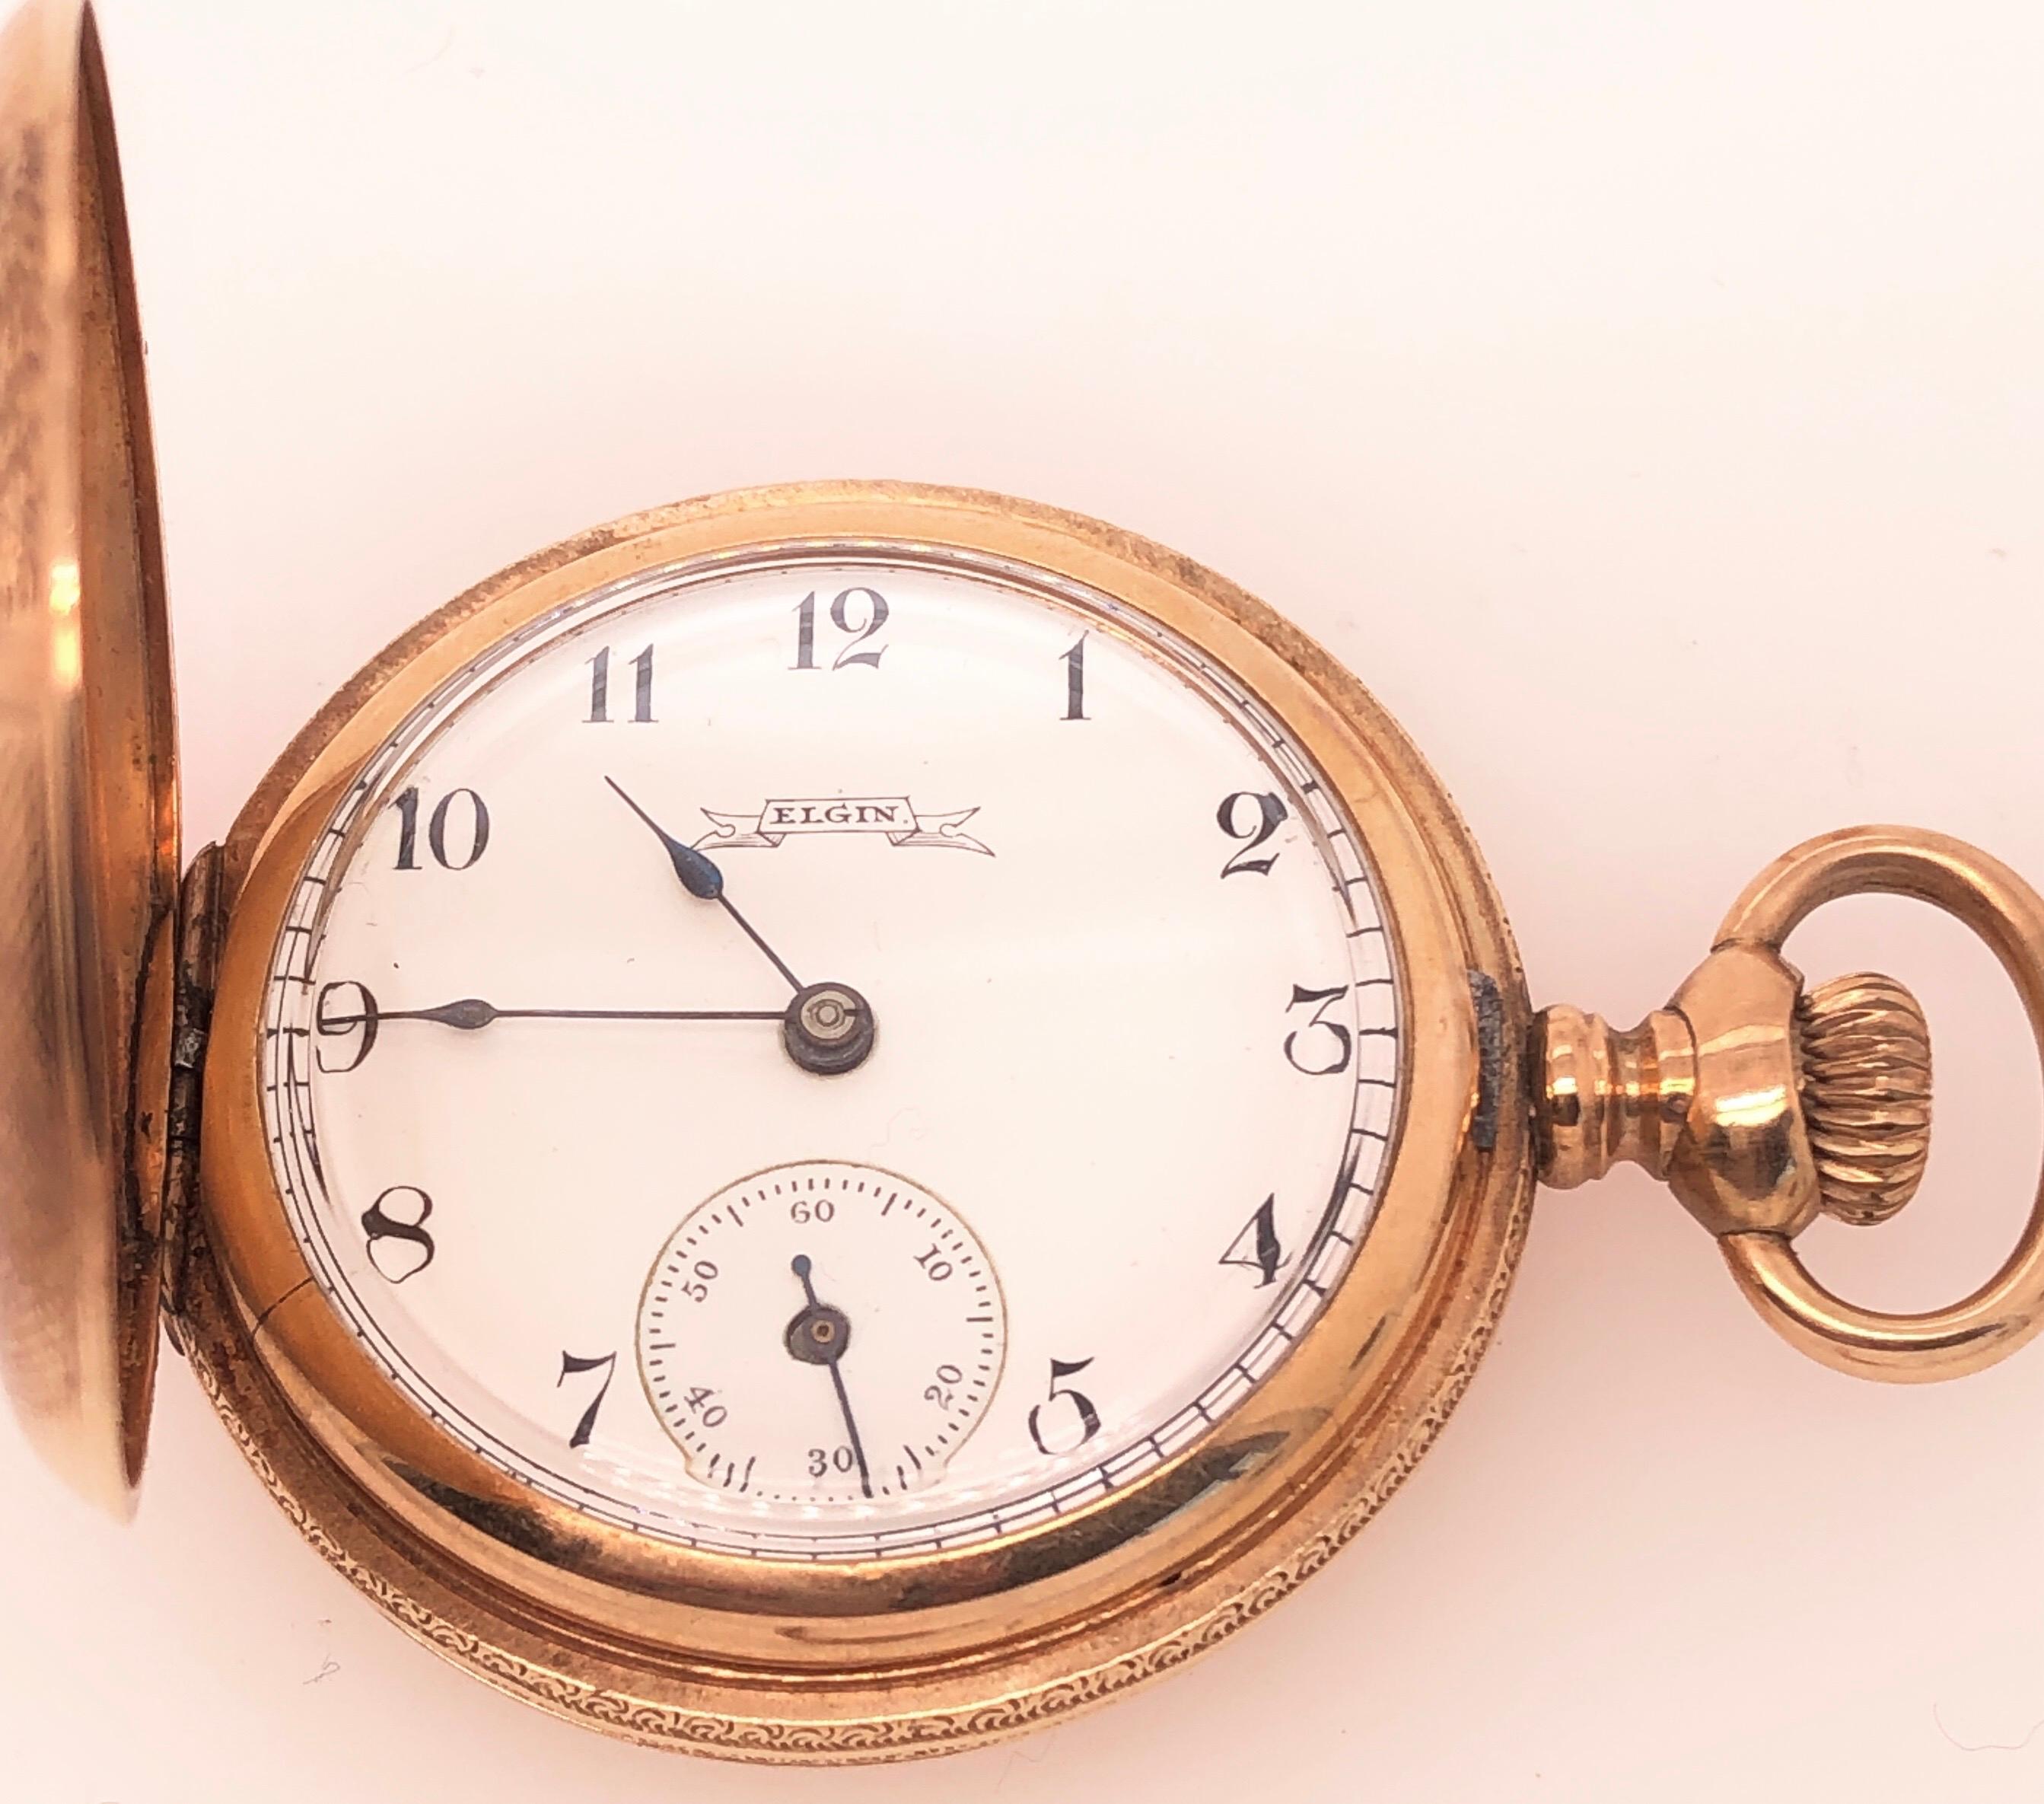 Antique Elgin Pocket Watch 14K Yellow Gold Pocket Watch, front and back of case are intricately engraved. White enamel dial with black Arabic numerals. This is an exceptionally well preserved vintage pocket watch. 34 mm diameter. This item was just